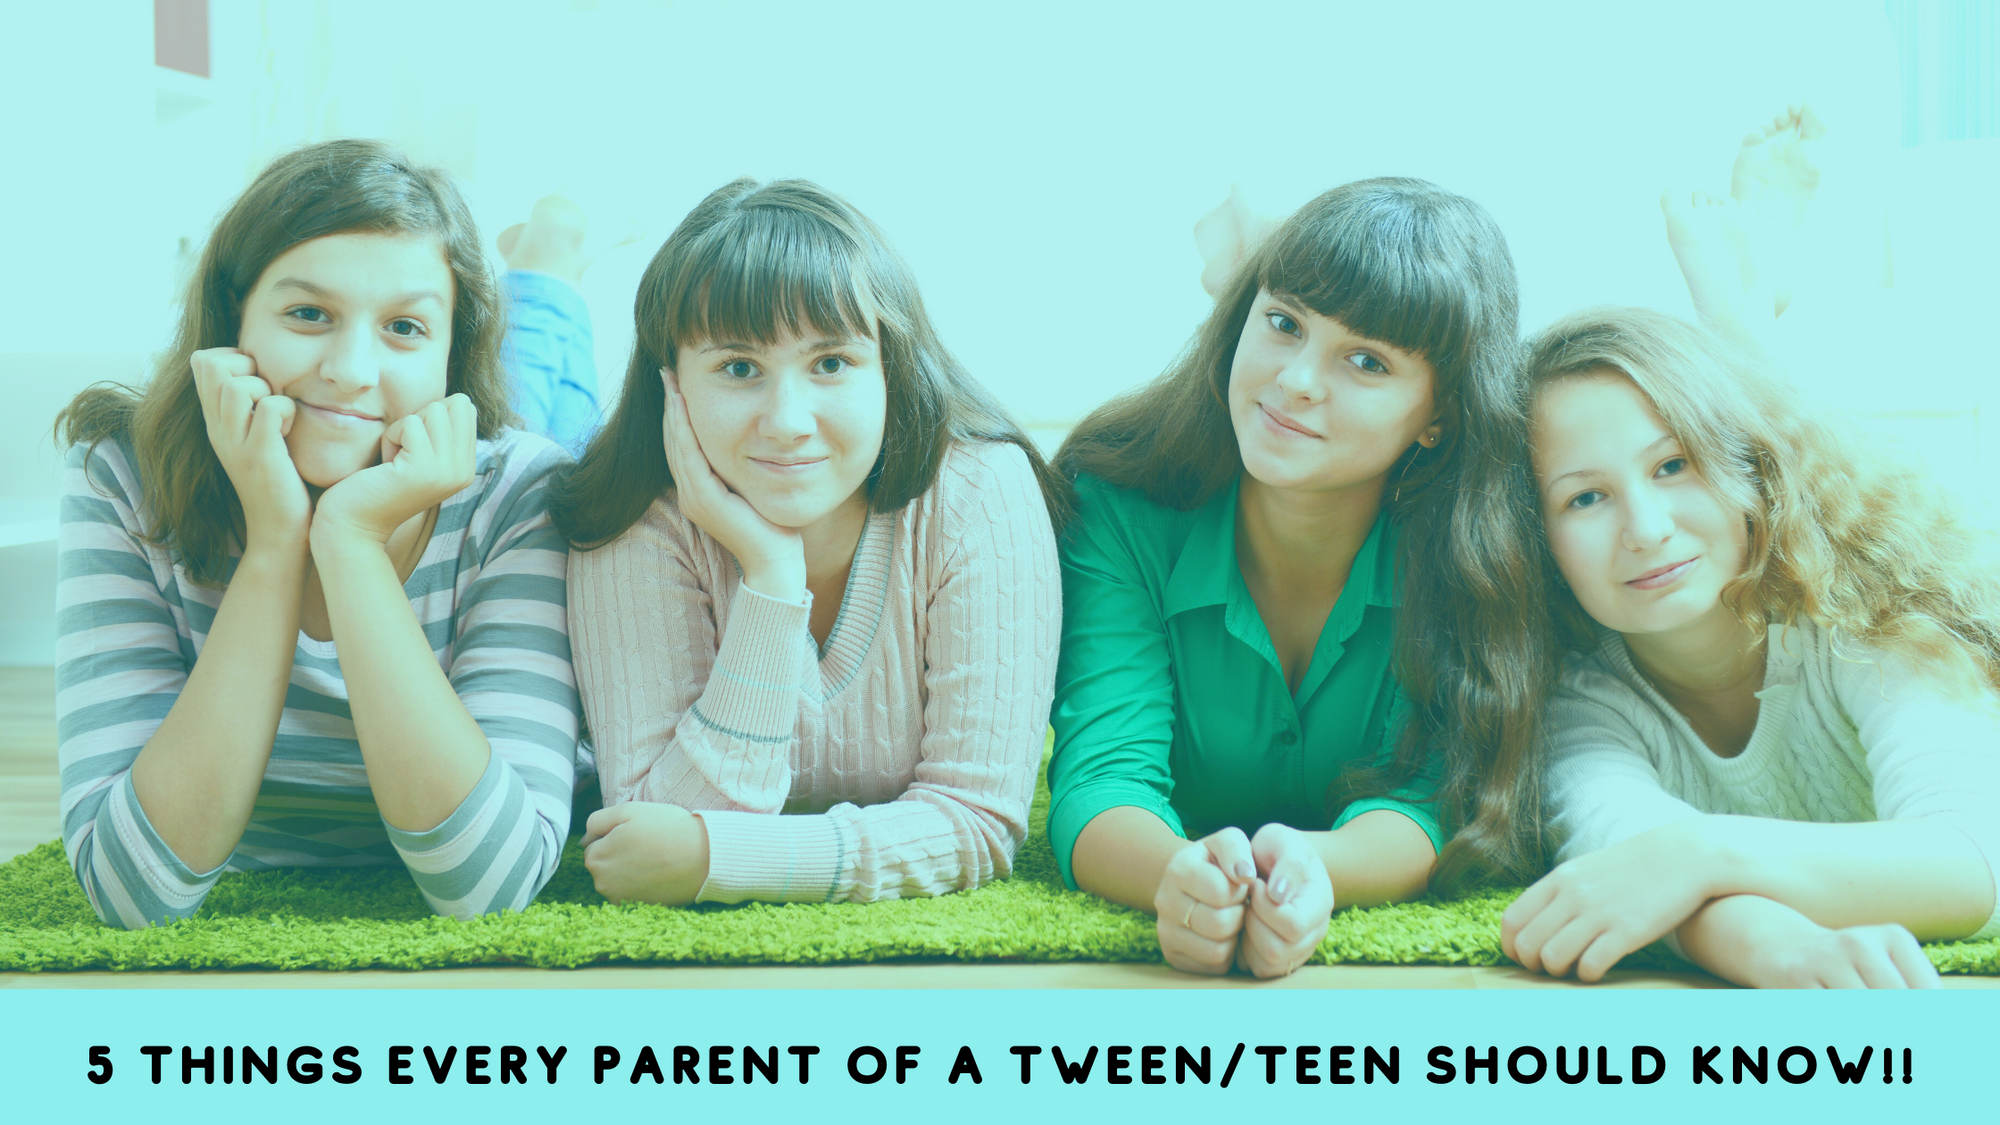 5 Things Every Parent of a Tween/Teen Should Know!!